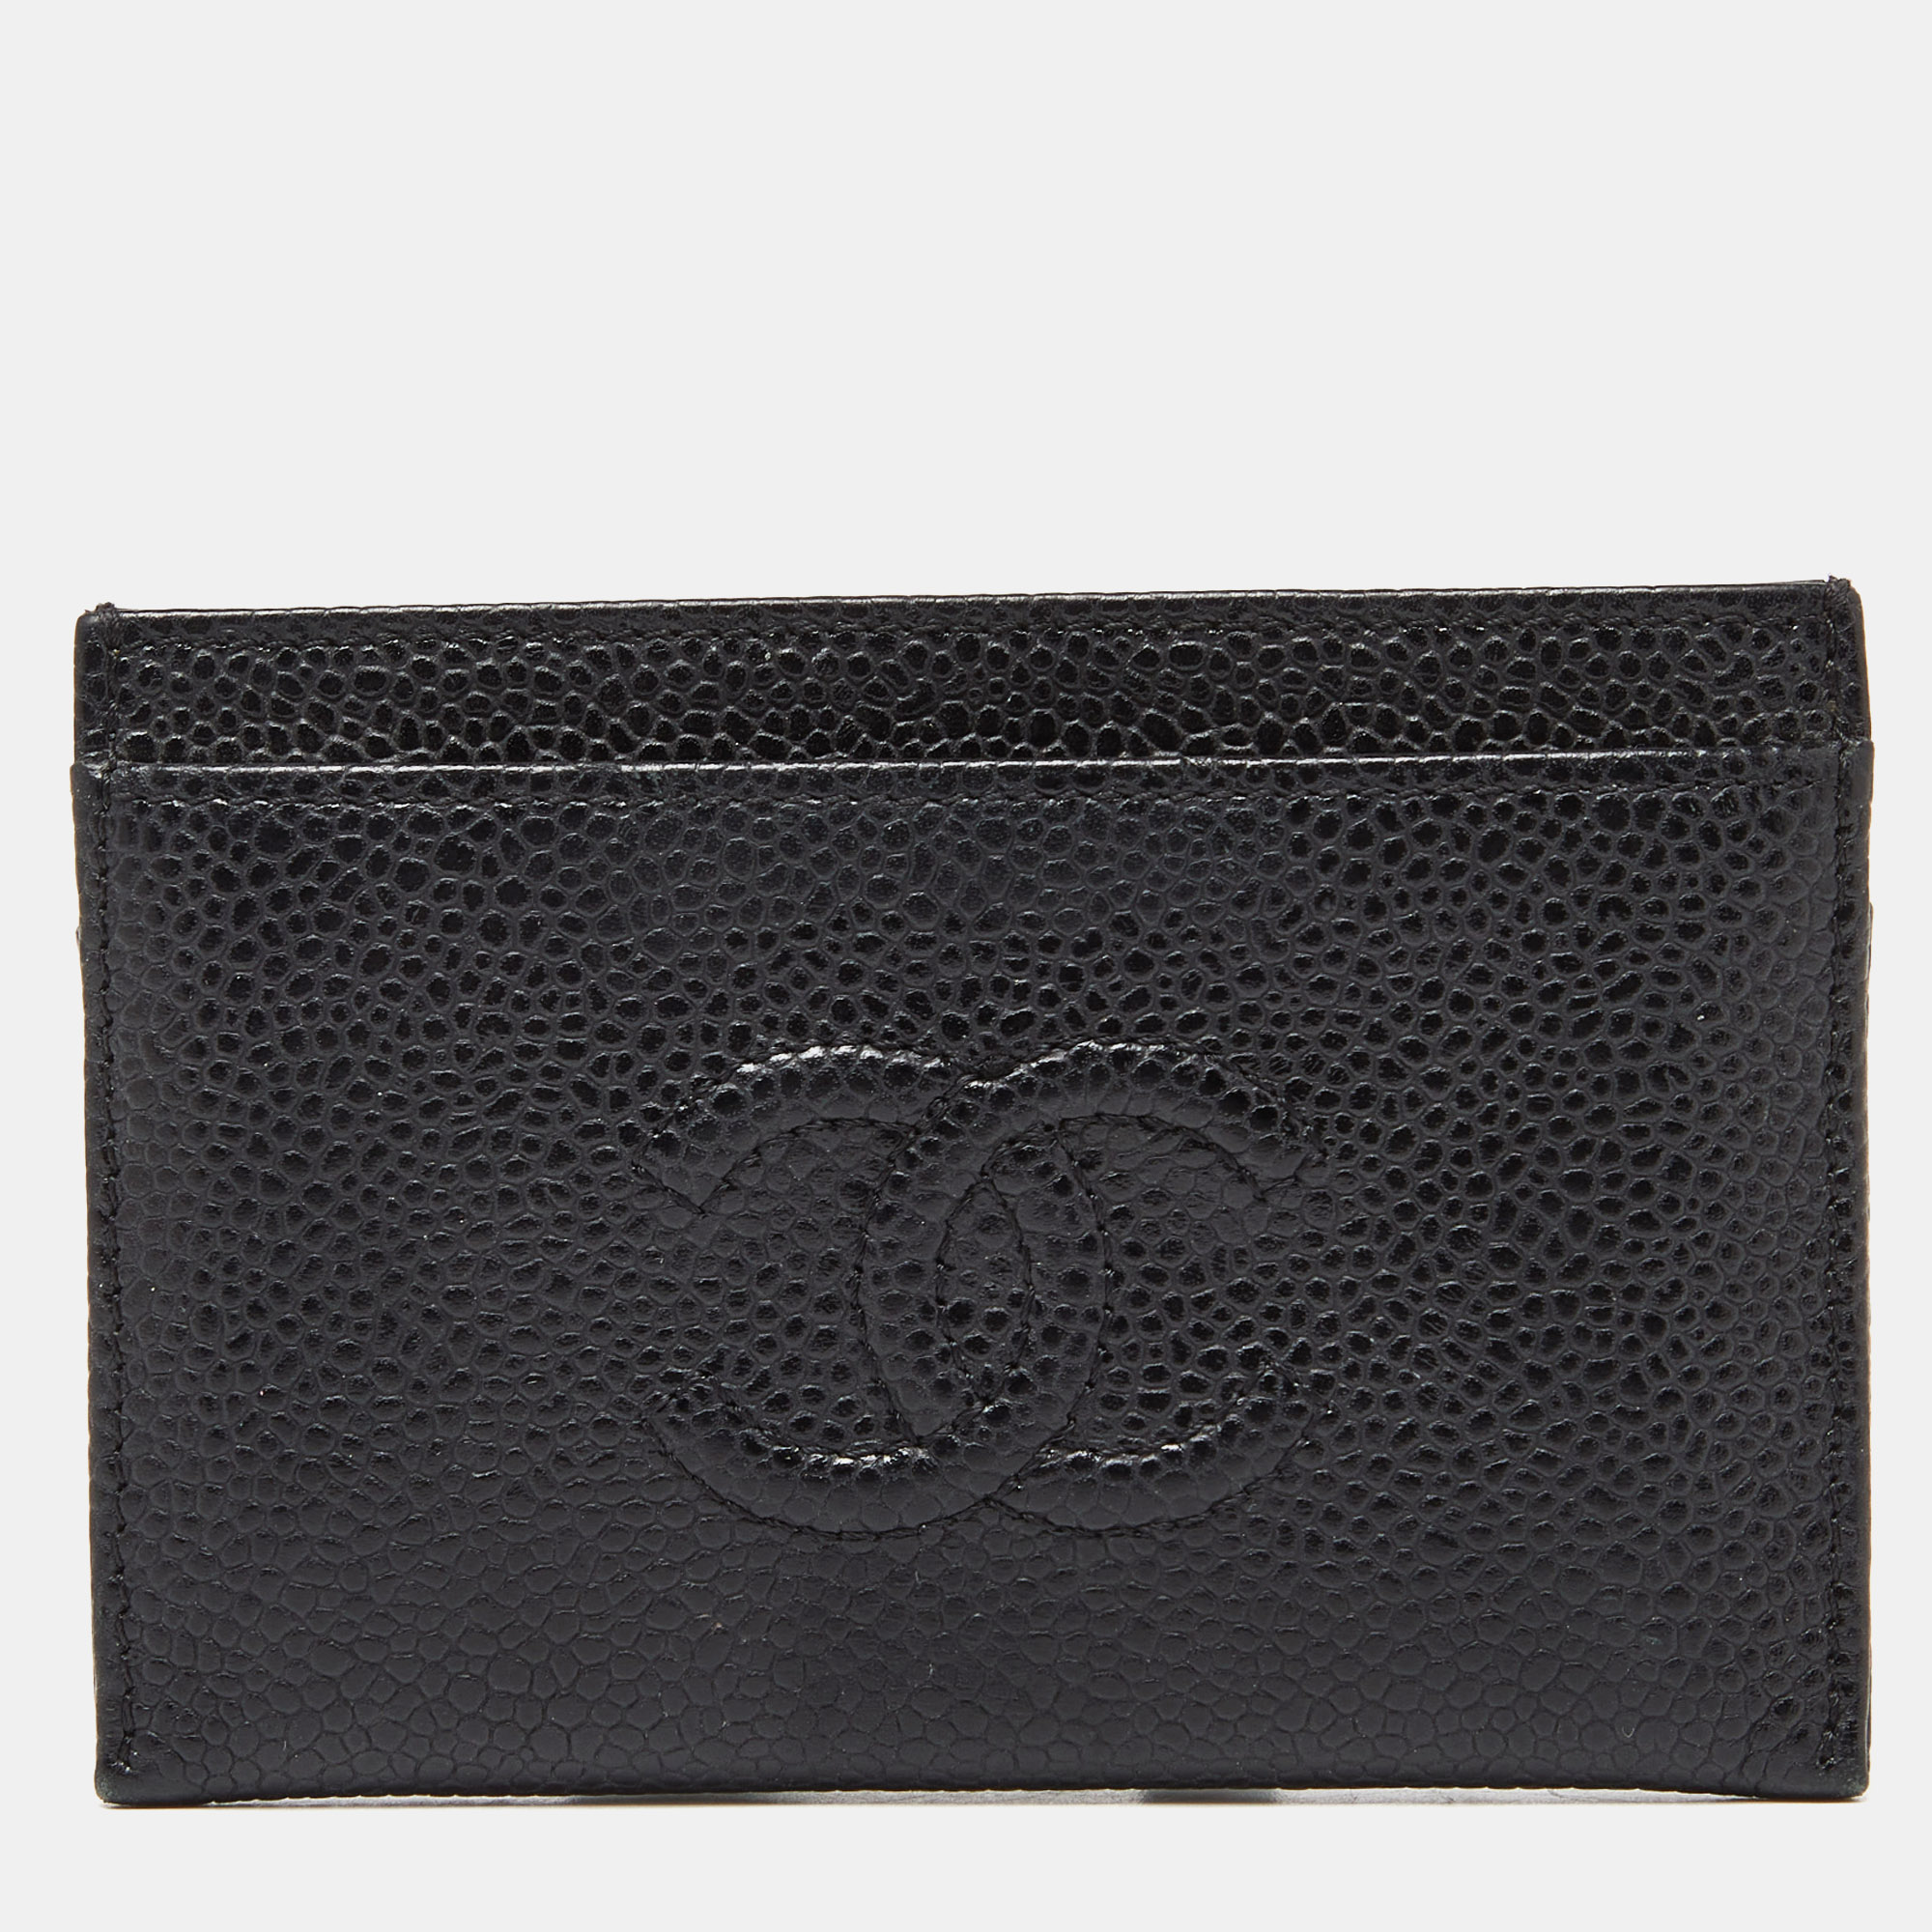 Pre-owned Chanel Black Caviar Leather Cc Card Holder